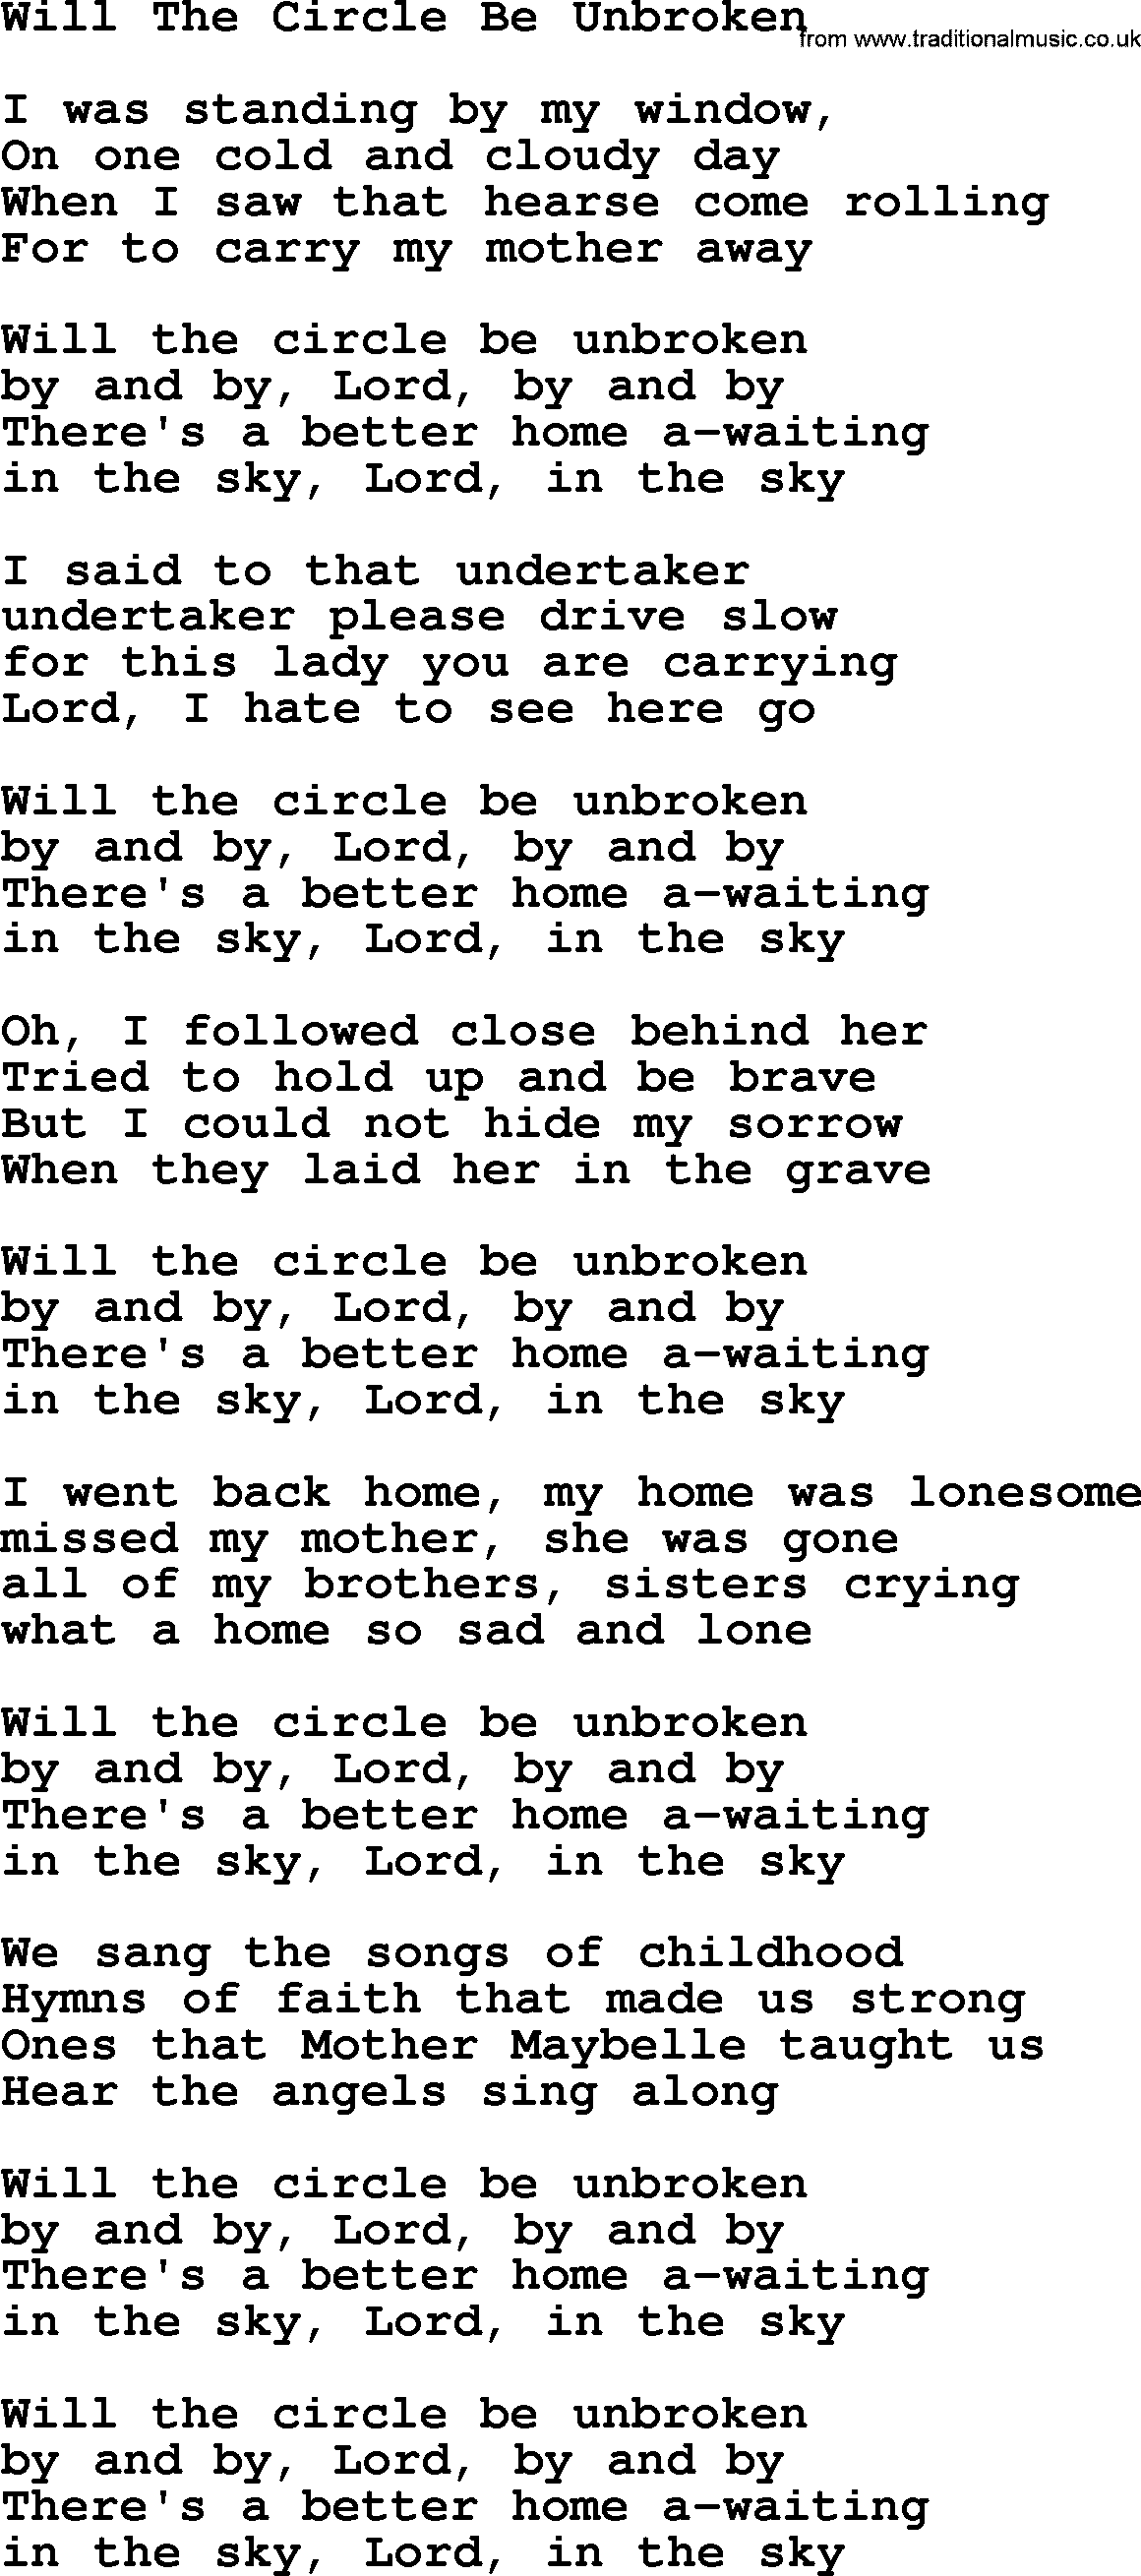 Willie Nelson song: Will The Circle Be Unbroken lyrics